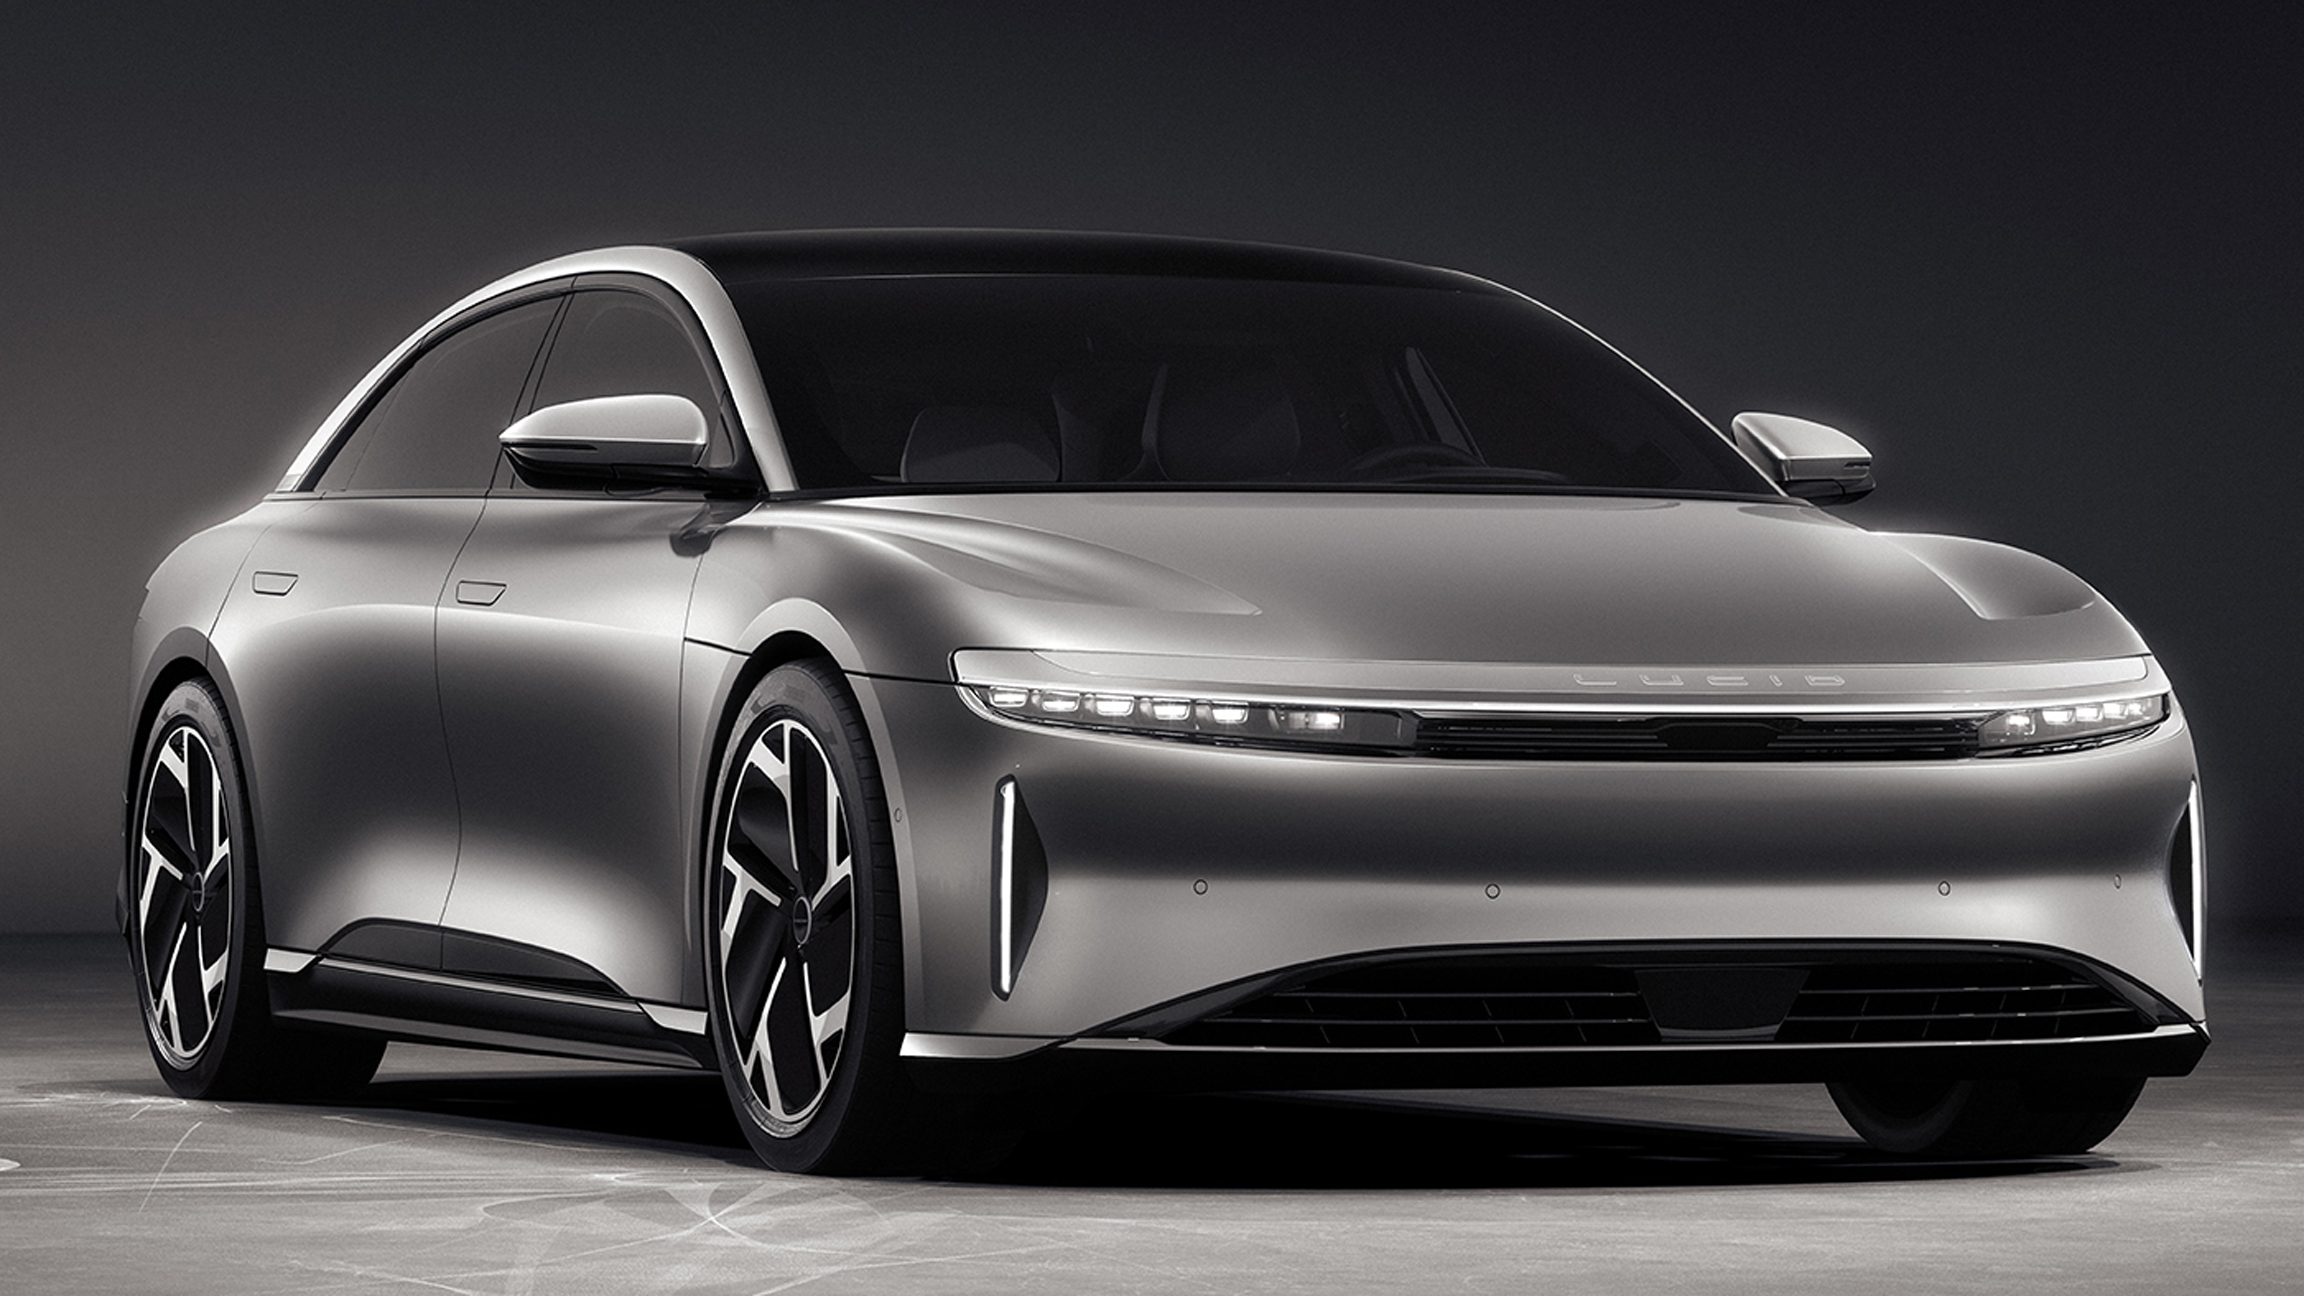 the-lucid-air-electric-car-will-start-at-77-400-with-406-mile-range